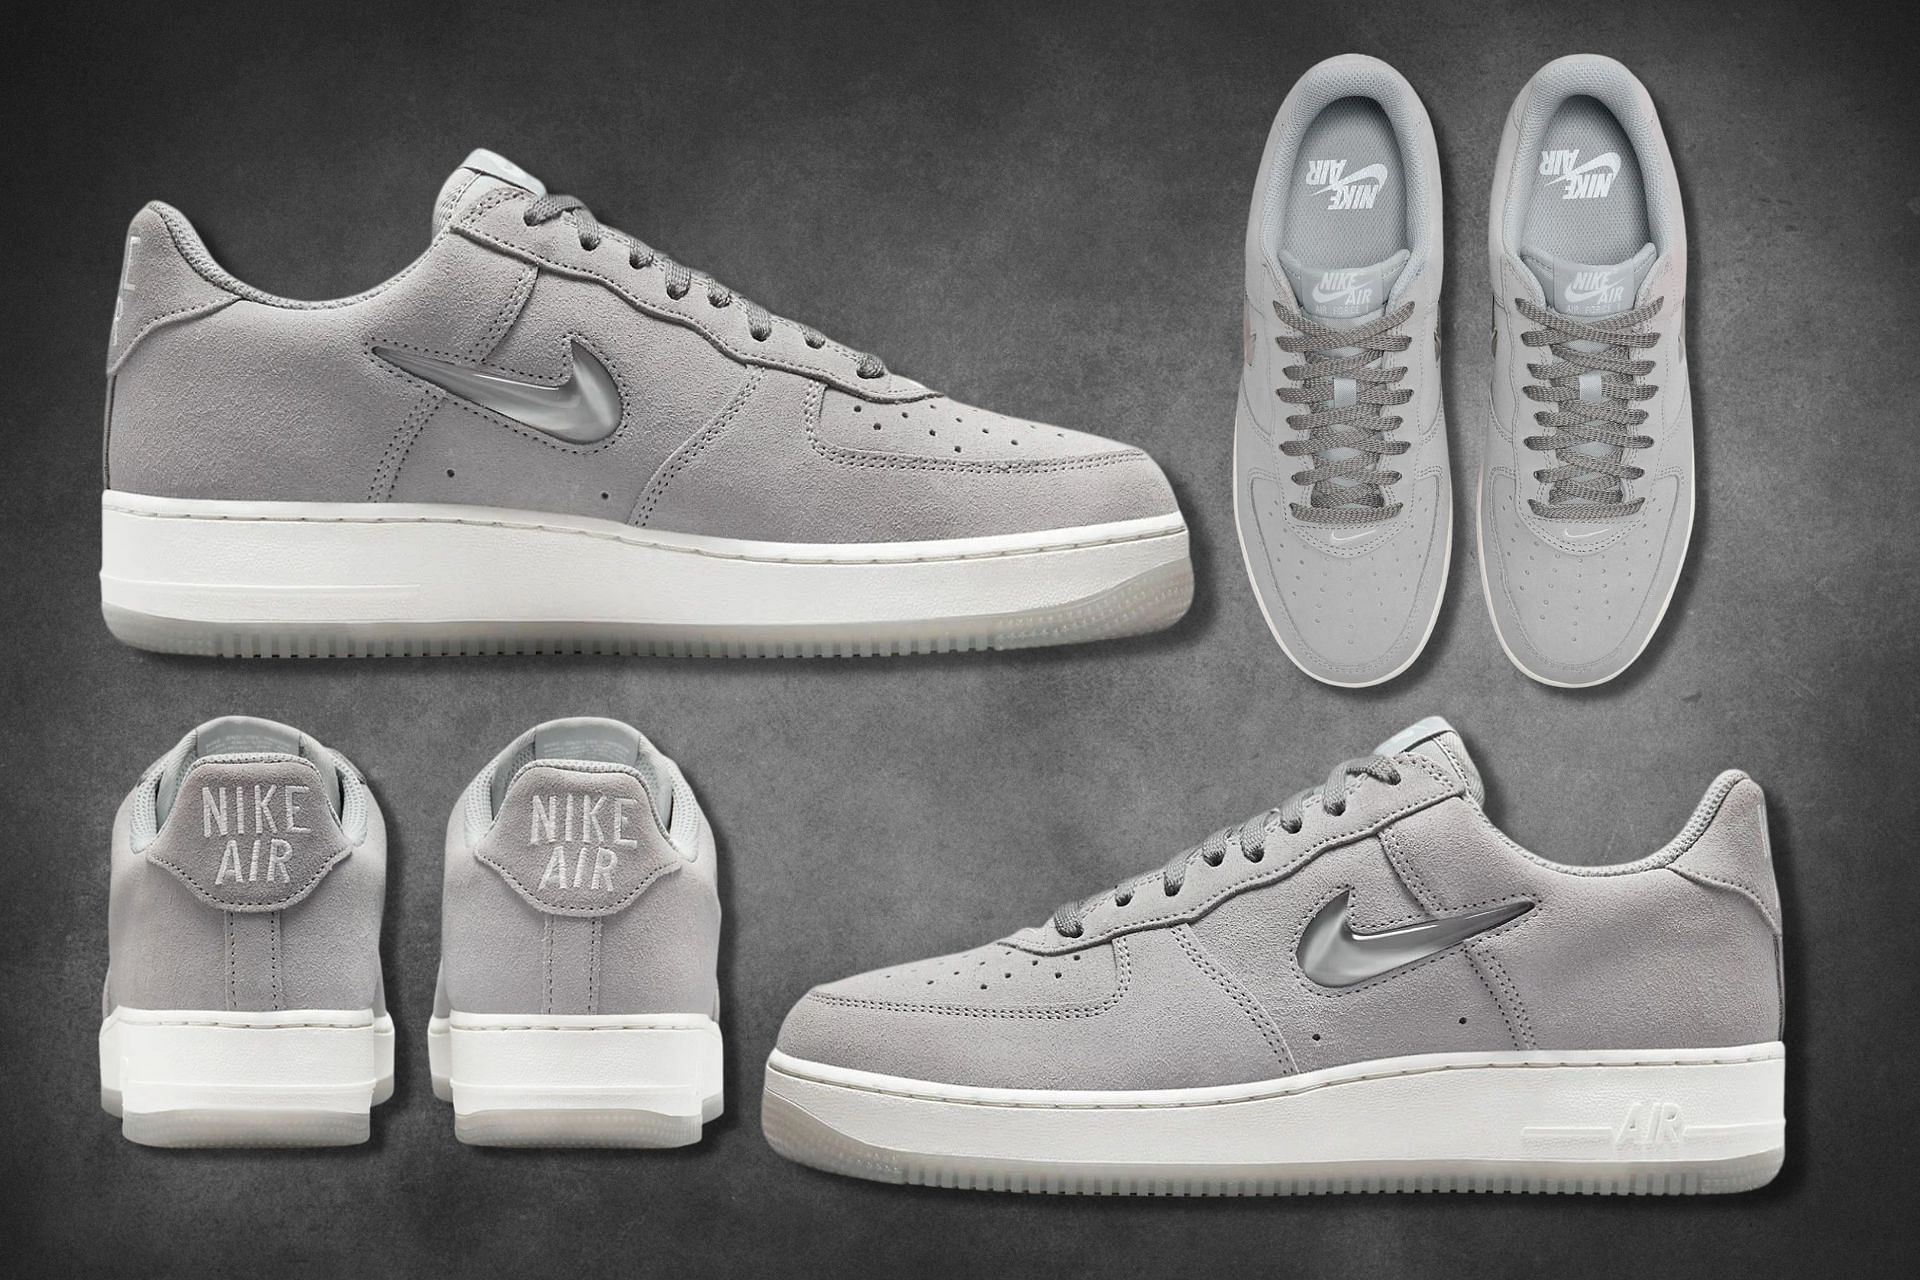 Where to buy Nike Air Force 1 Low “Color of the month” Grey shoes ...